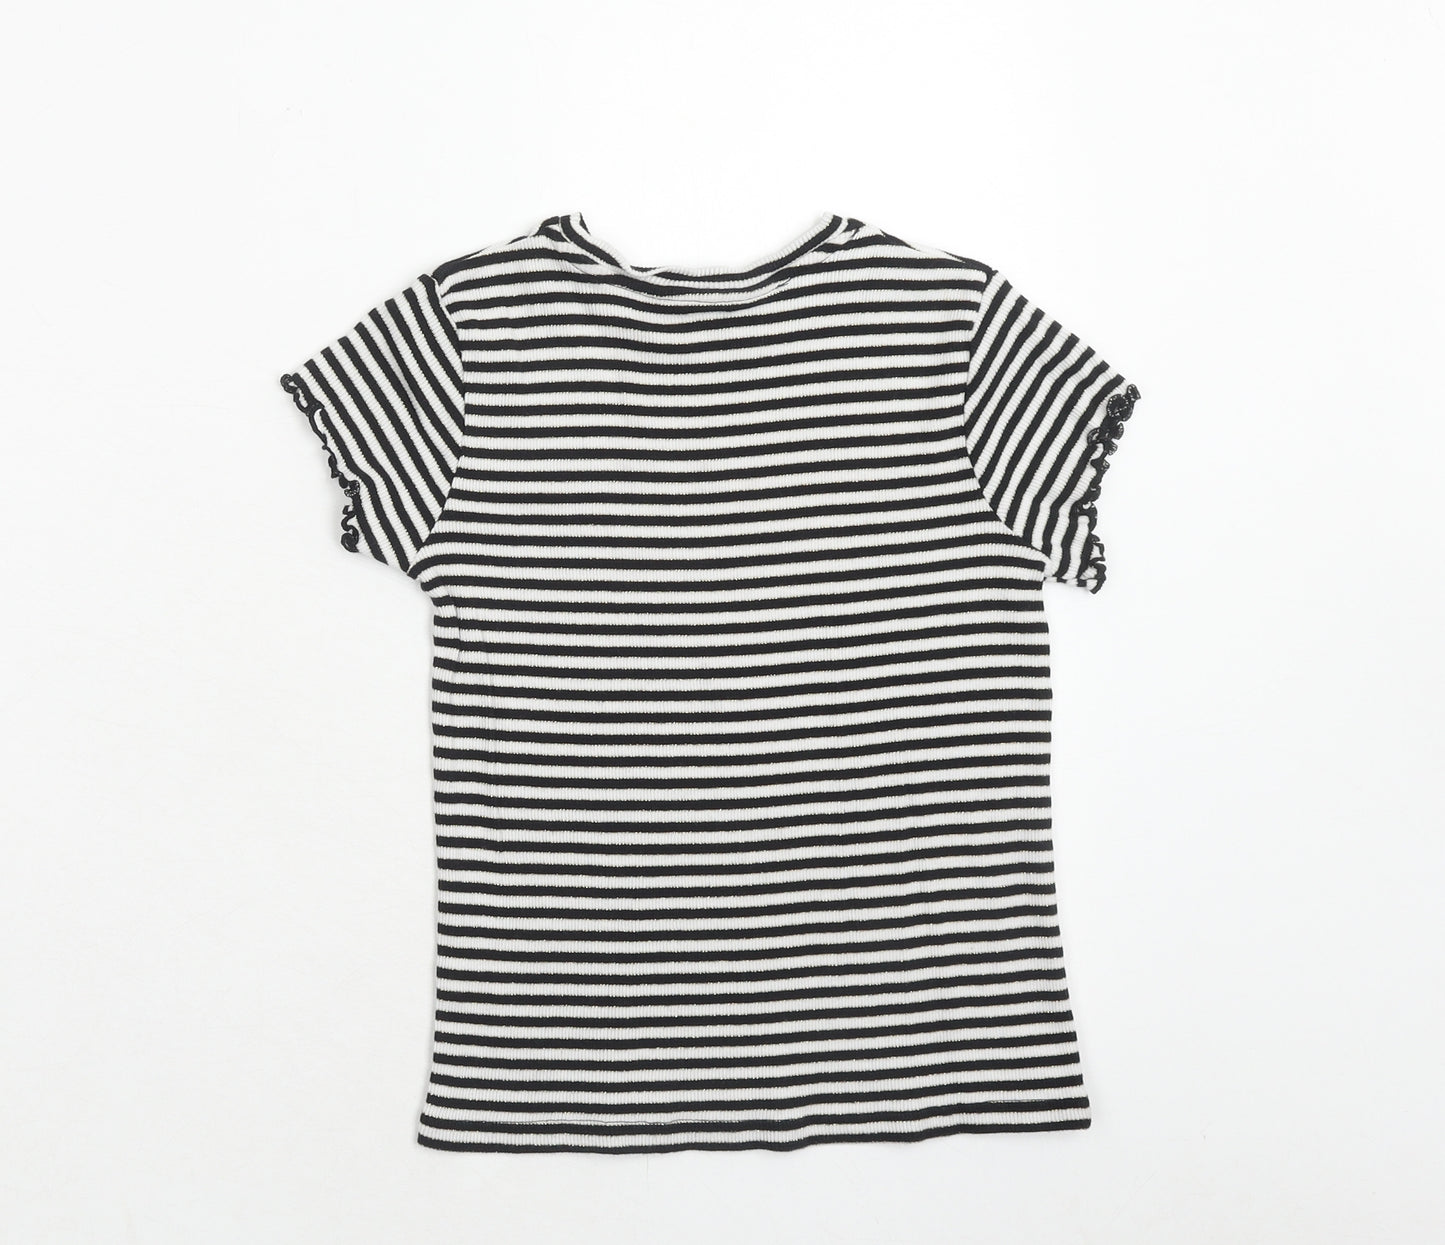 George Girls White Striped Cotton Basic T-Shirt Size 8-9 Years Round Neck Pullover